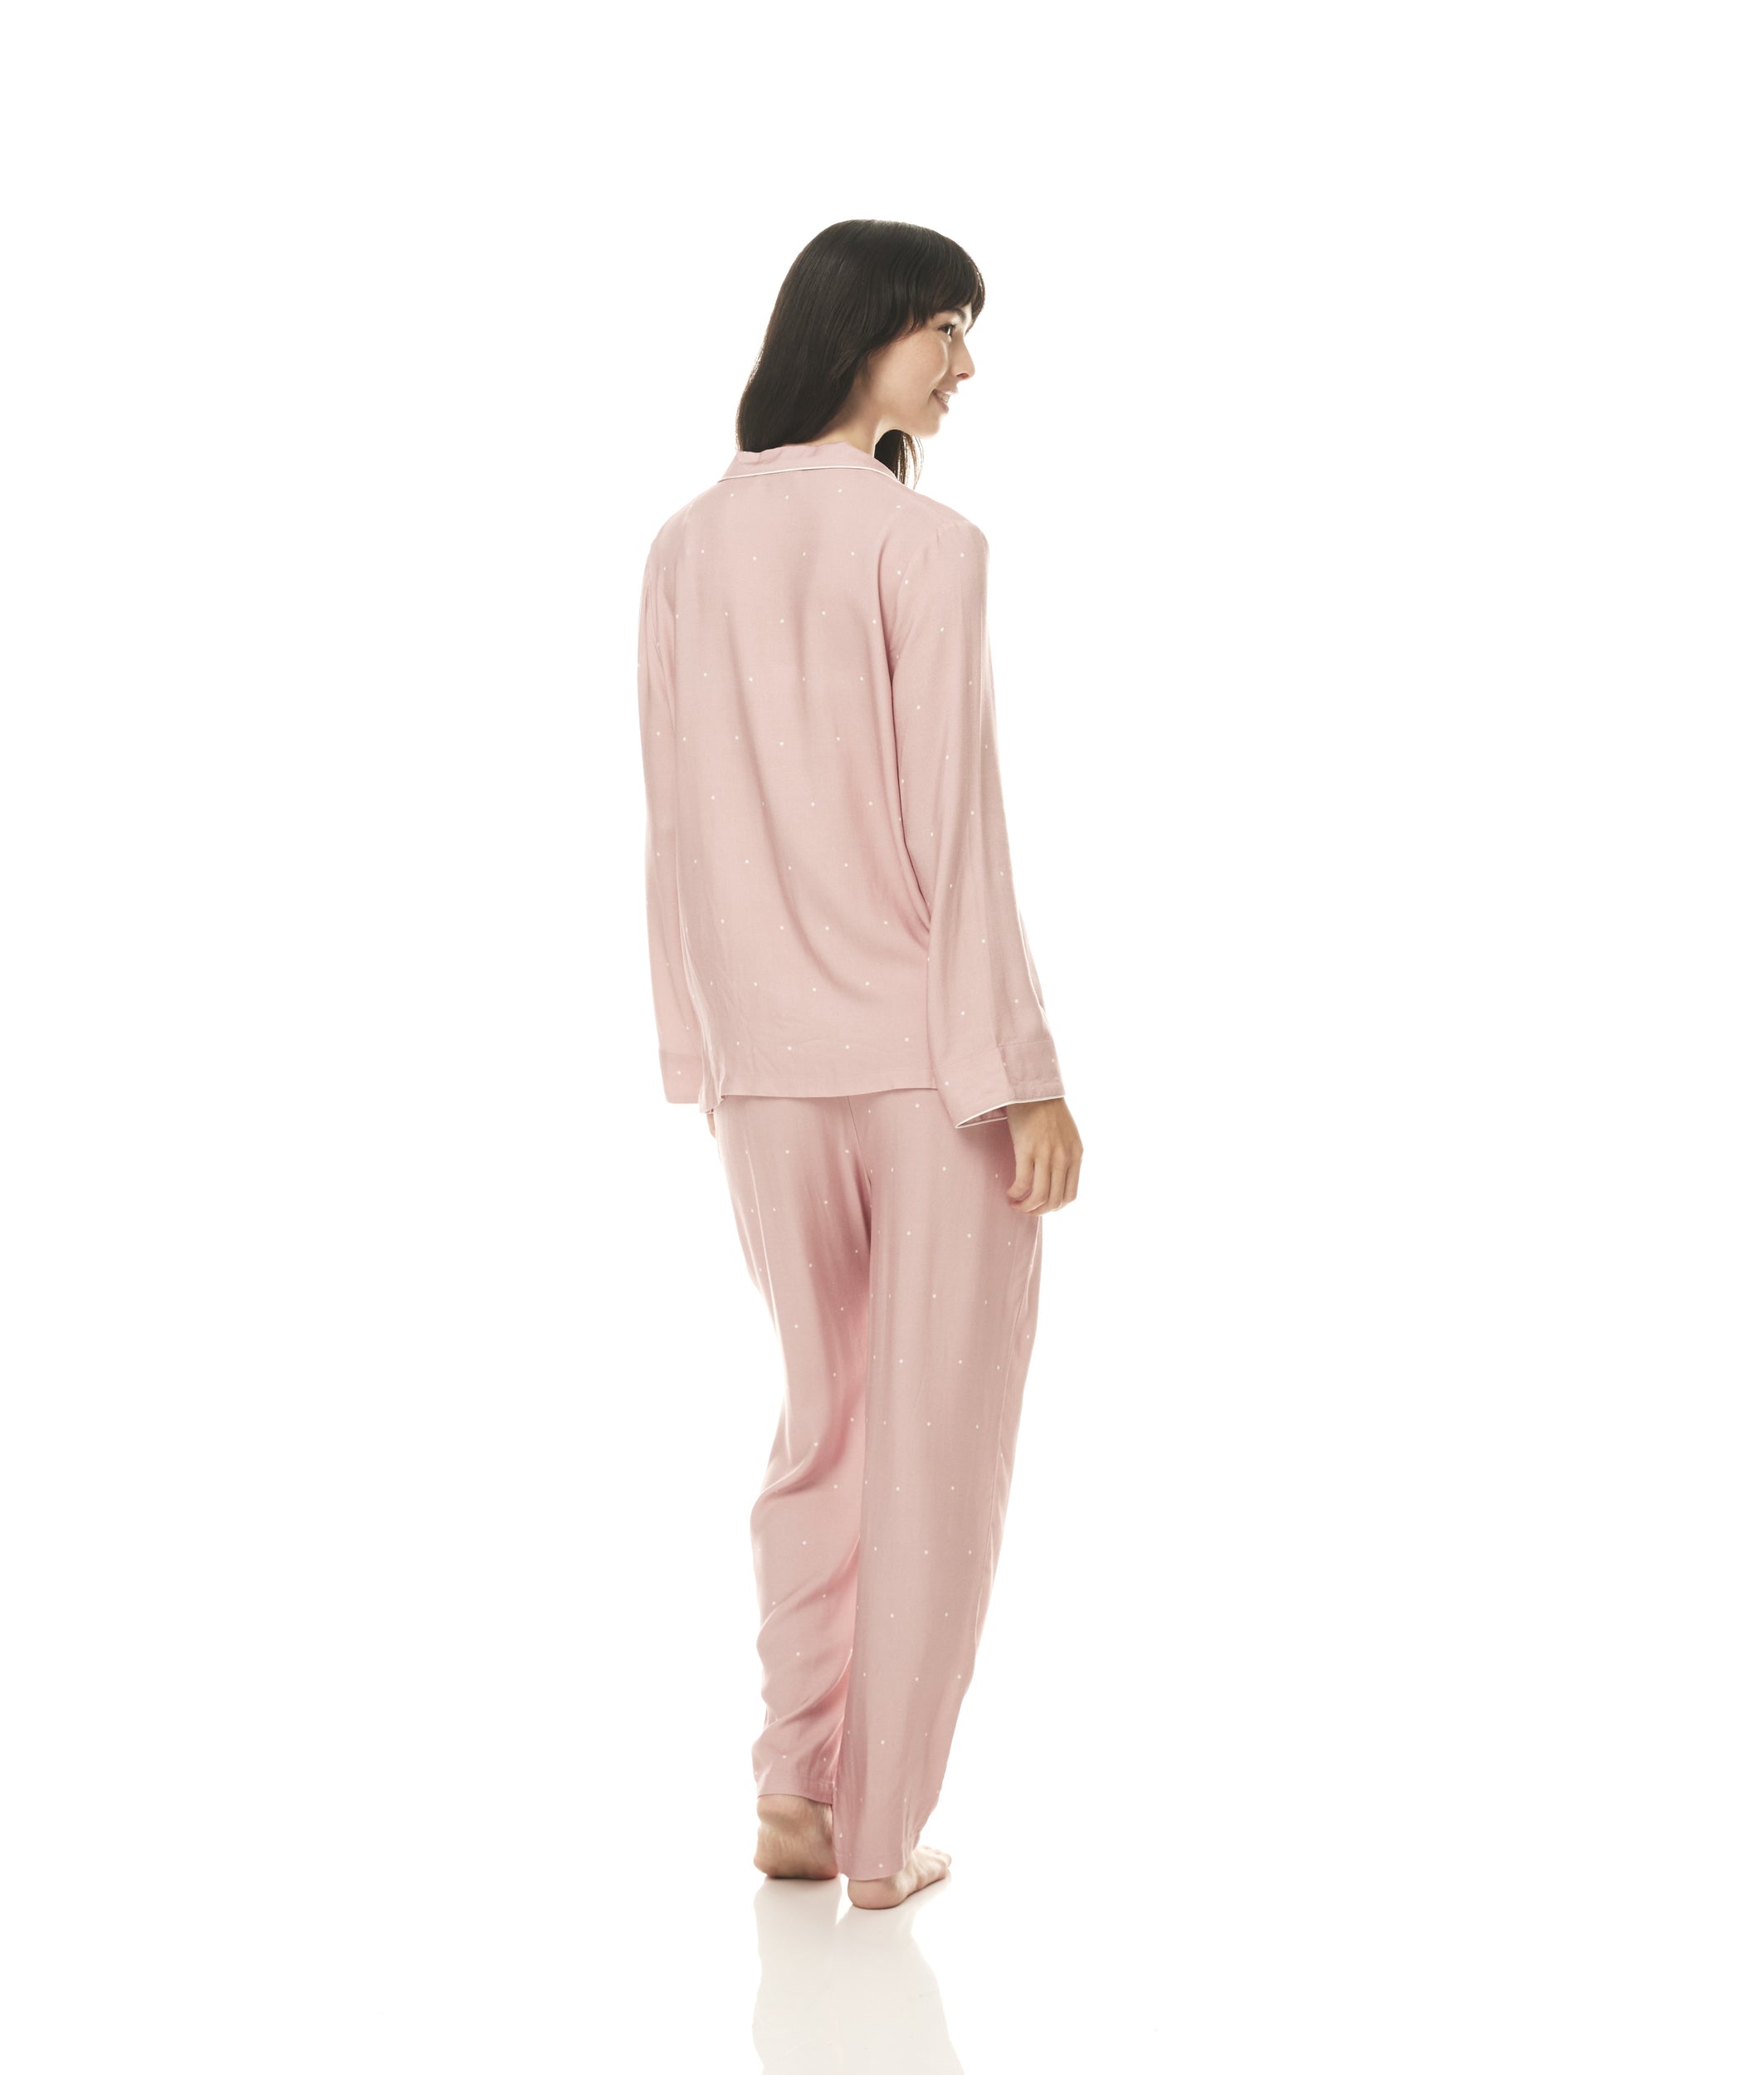 &quot;Dream in comfort with bamboo pajamas, designed with a touch of whimsy in pink polka dots. Order today!&quot;